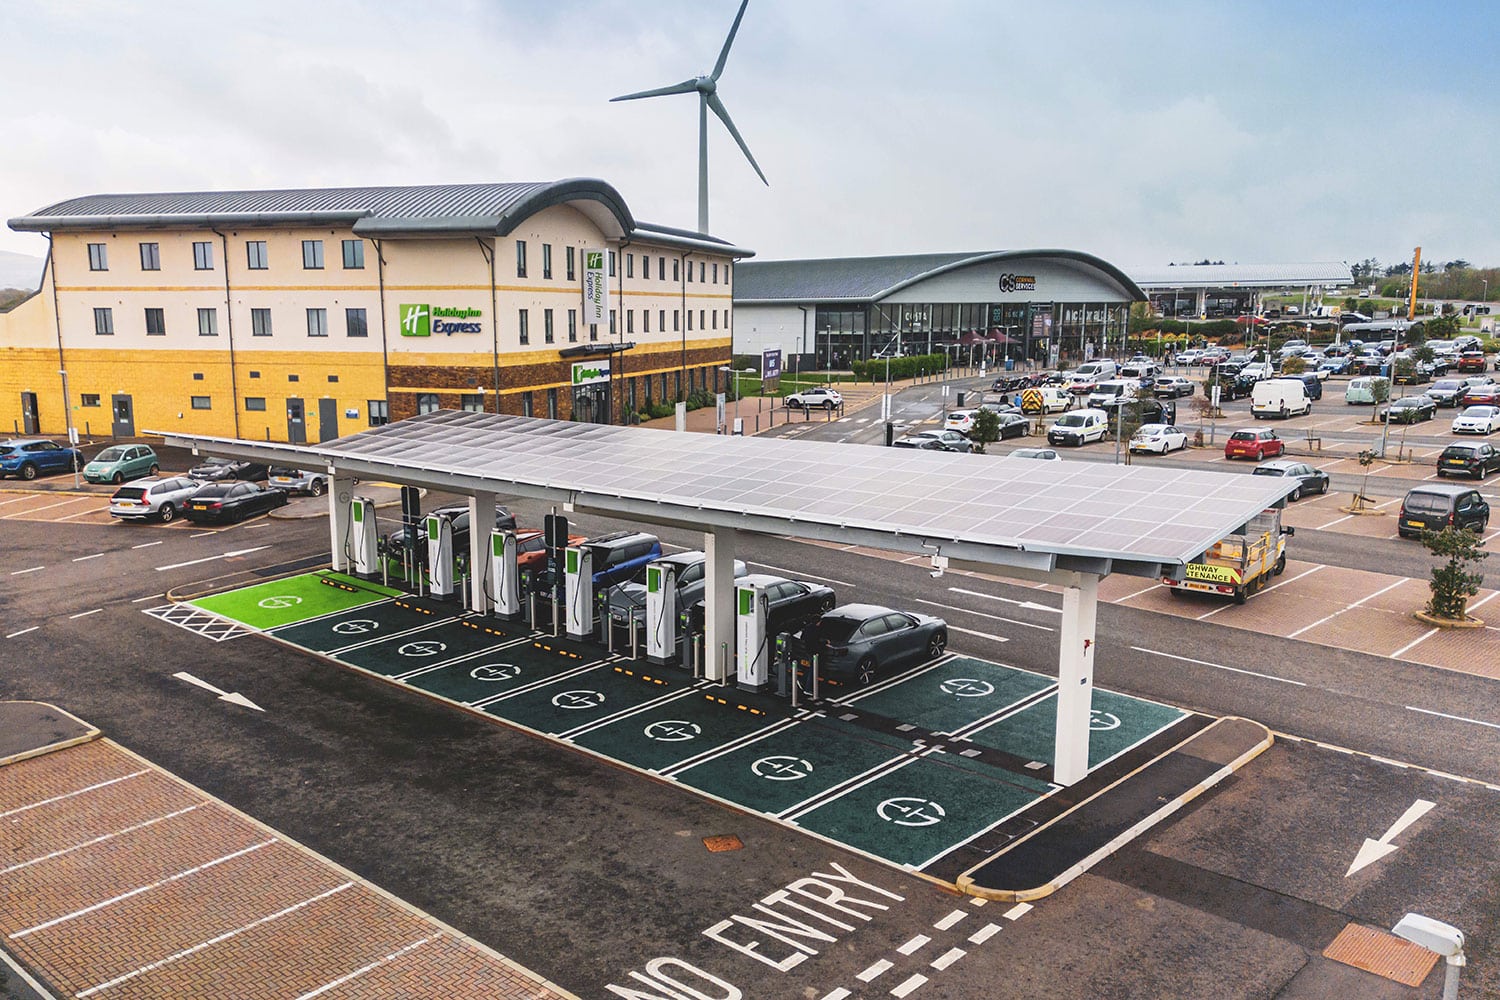 GRIDSERVE and Cornwall Services have opened a 12 charger Electric Super Hub on the A30.